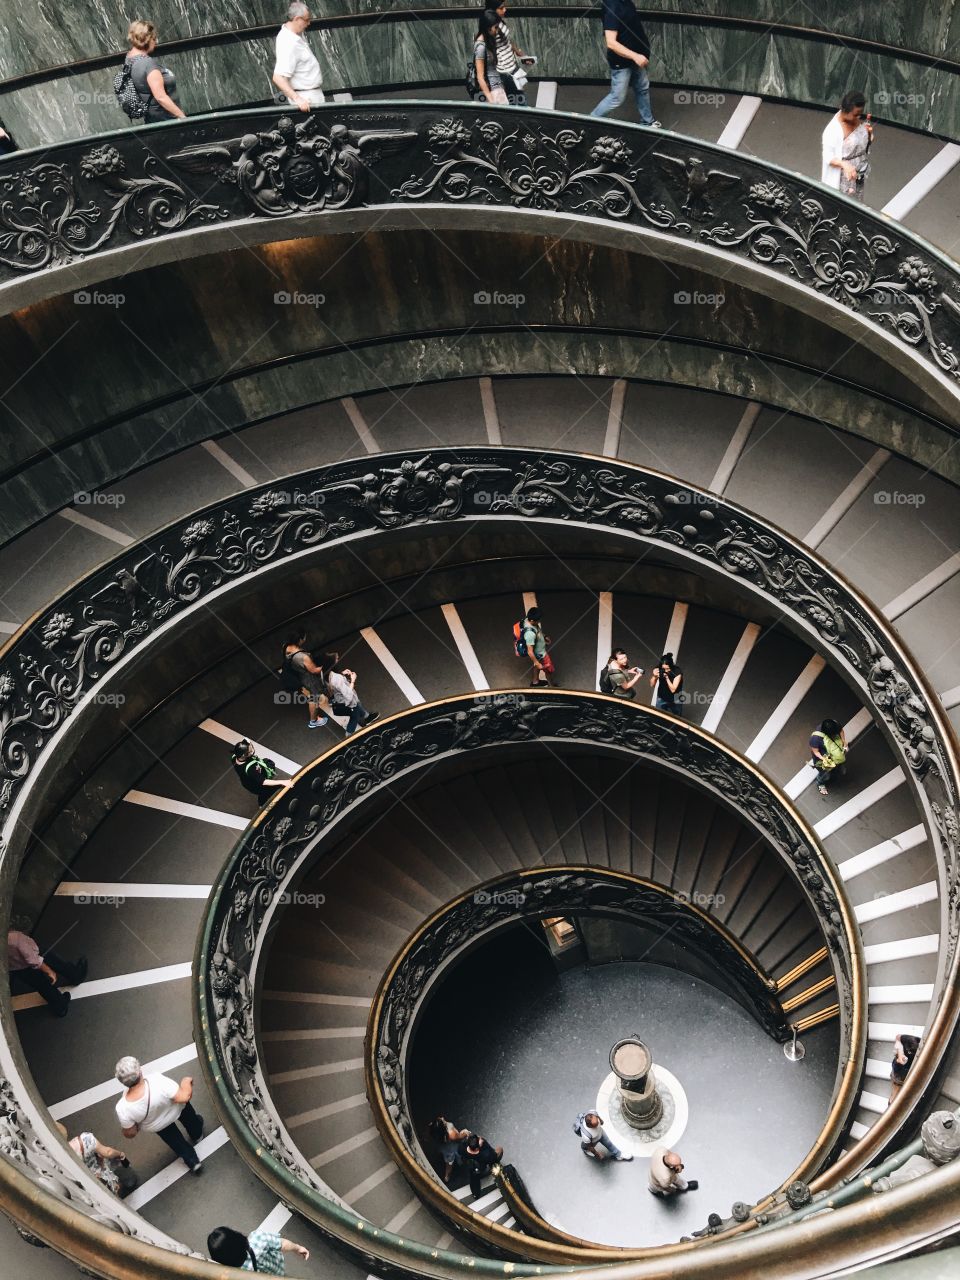 #Italy #travel #museum #eye #stairs #people
